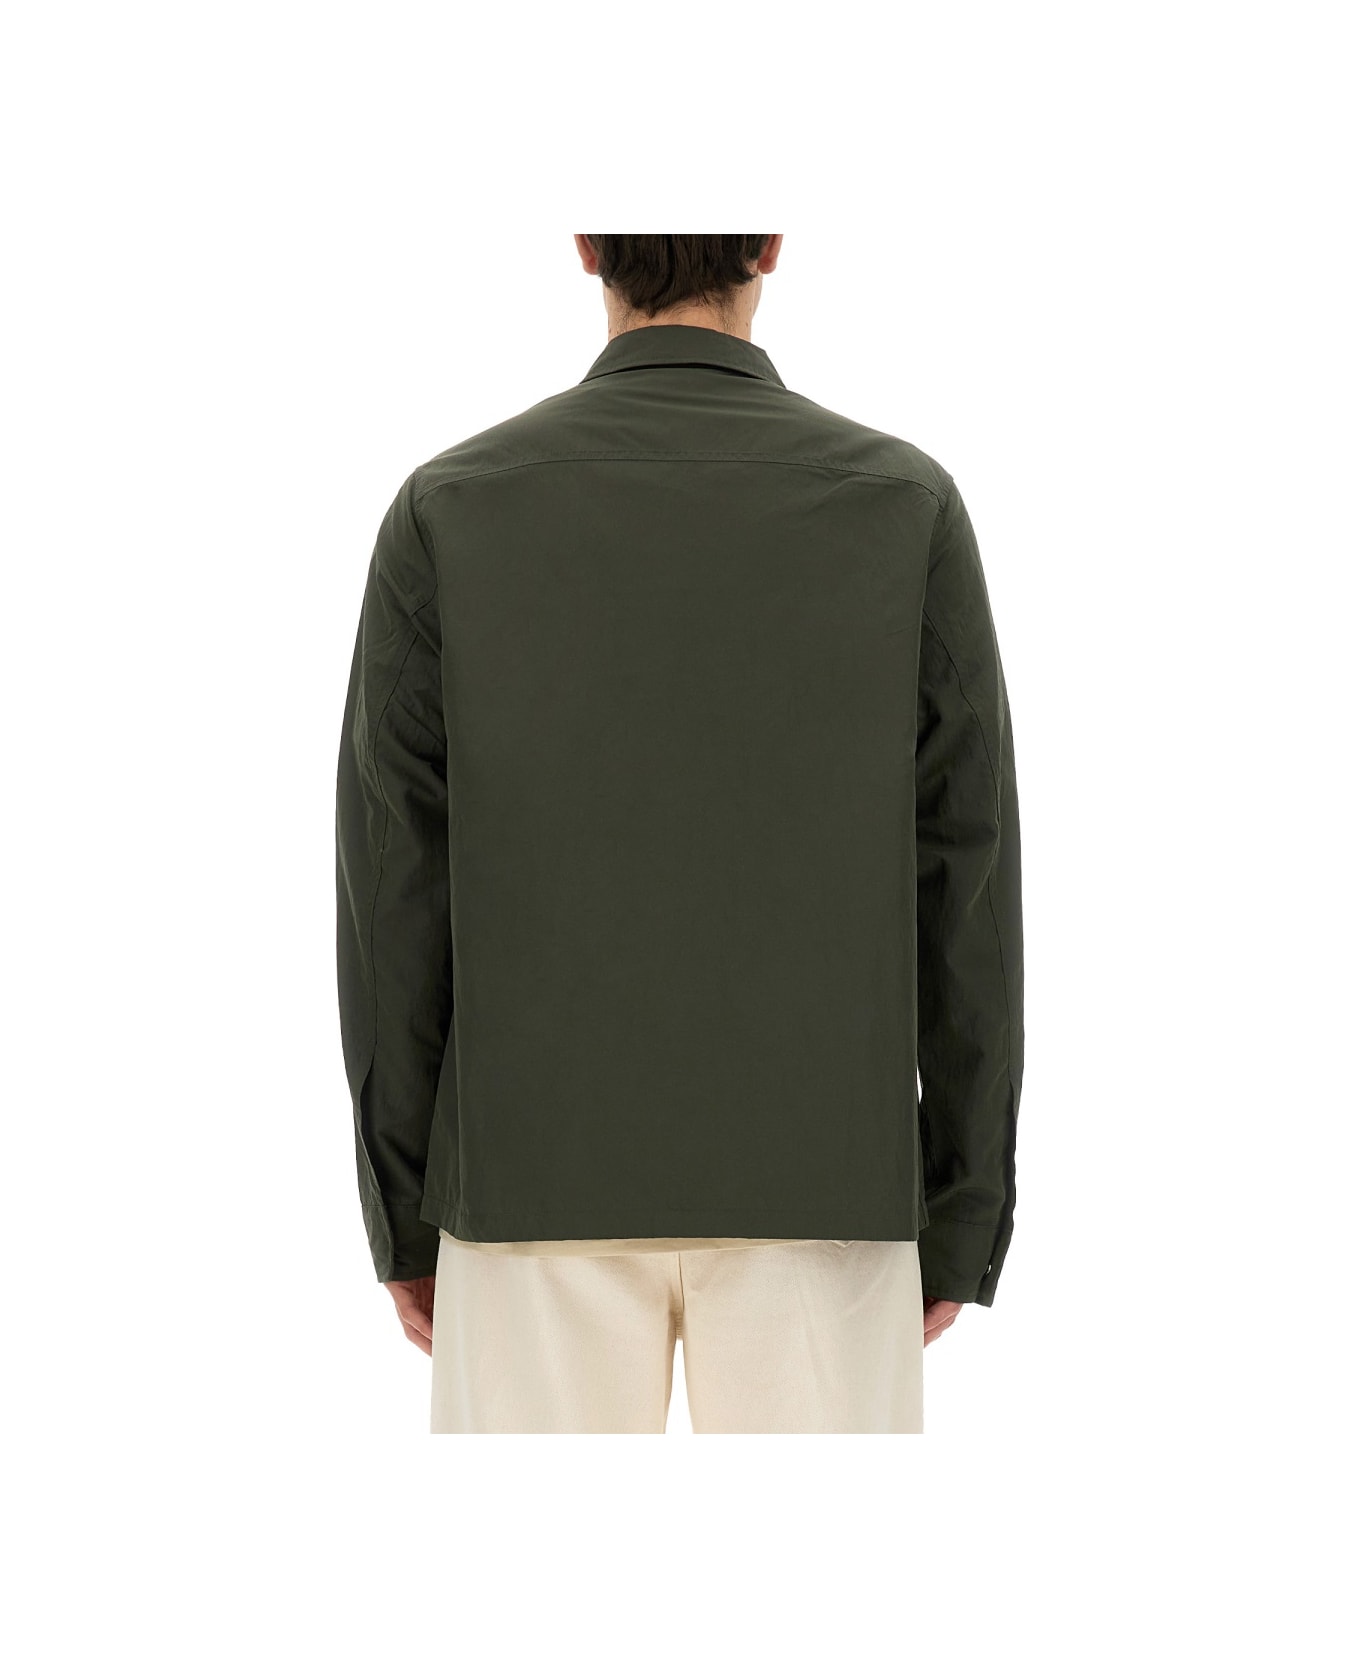 Fred Perry Shirt Jacket - MILITARY GREEN